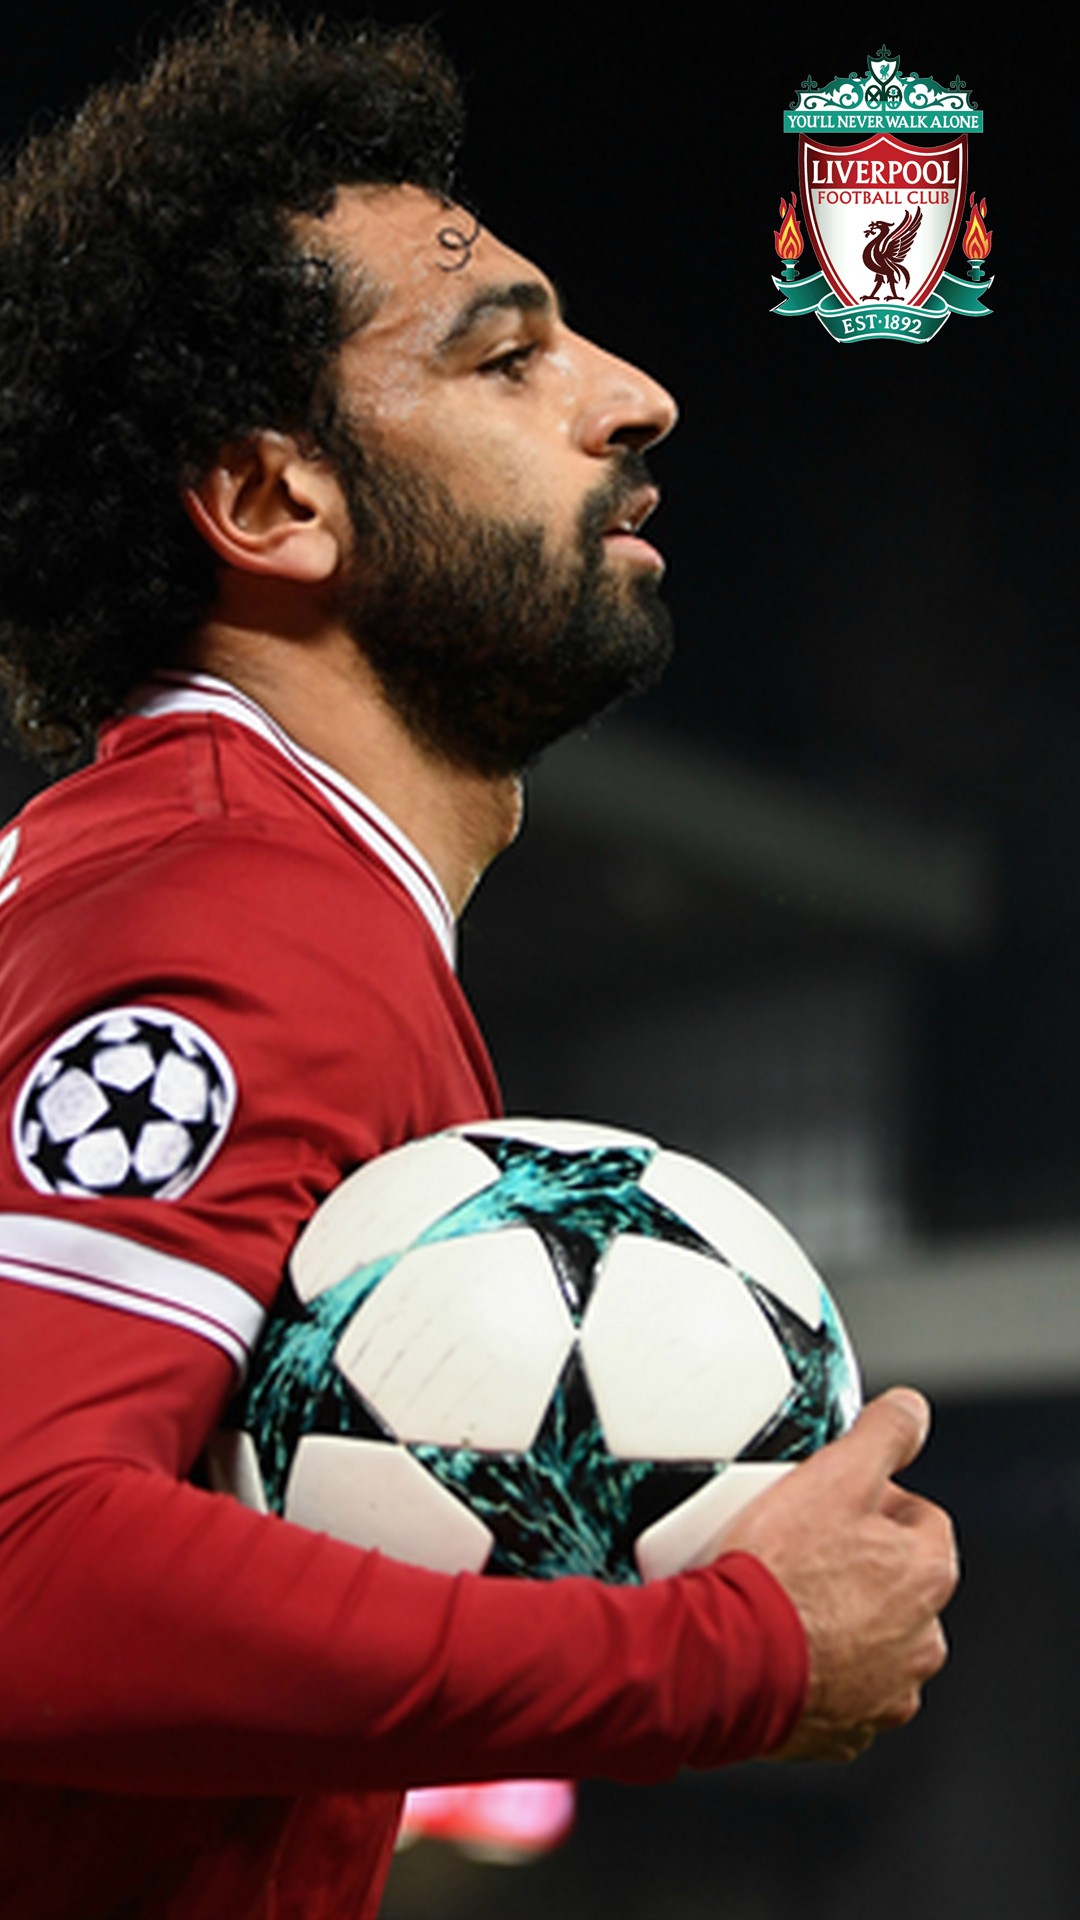 Wallpaper Android Salah Liverpool with image resolution 1080x1920 pixel. You can make this wallpaper for your Android backgrounds, Tablet, Smartphones Screensavers and Mobile Phone Lock Screen